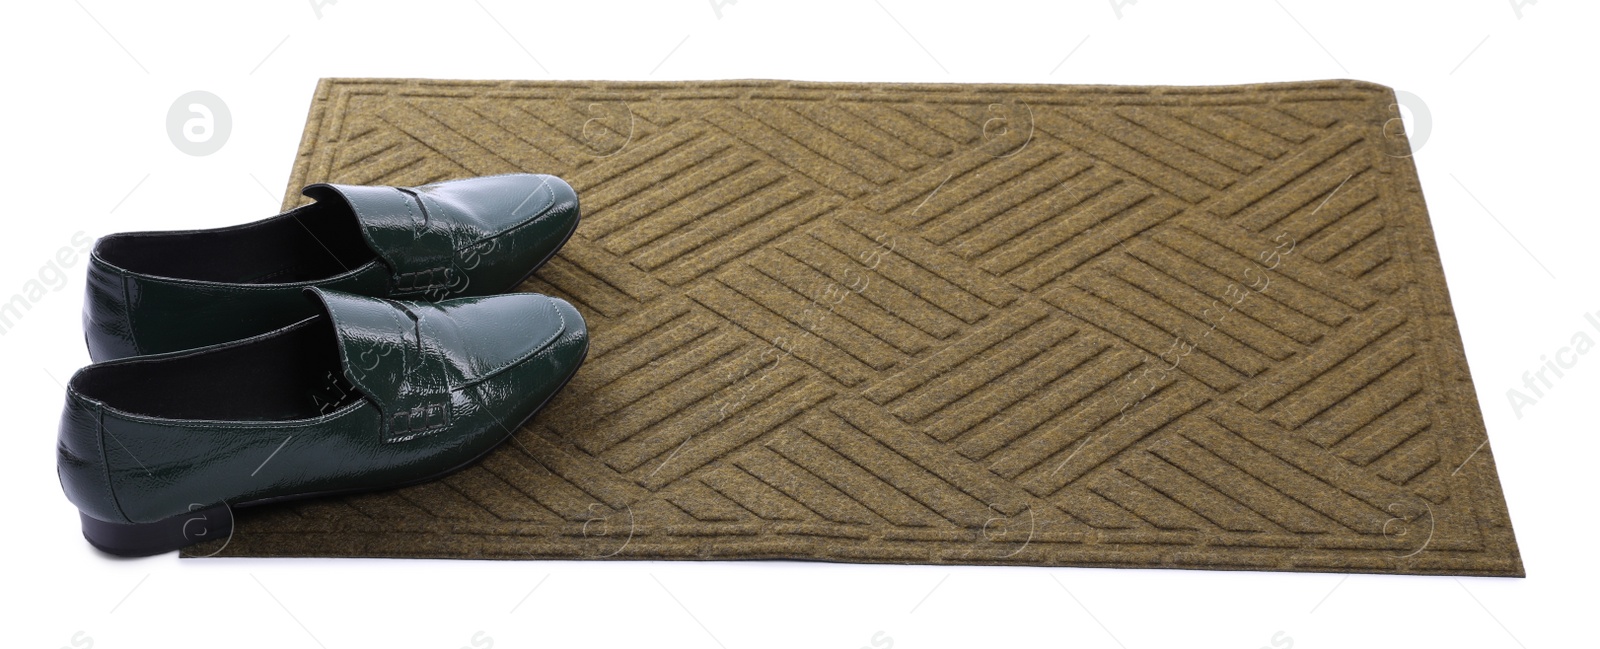 Photo of New clean door mat with shoes on white background